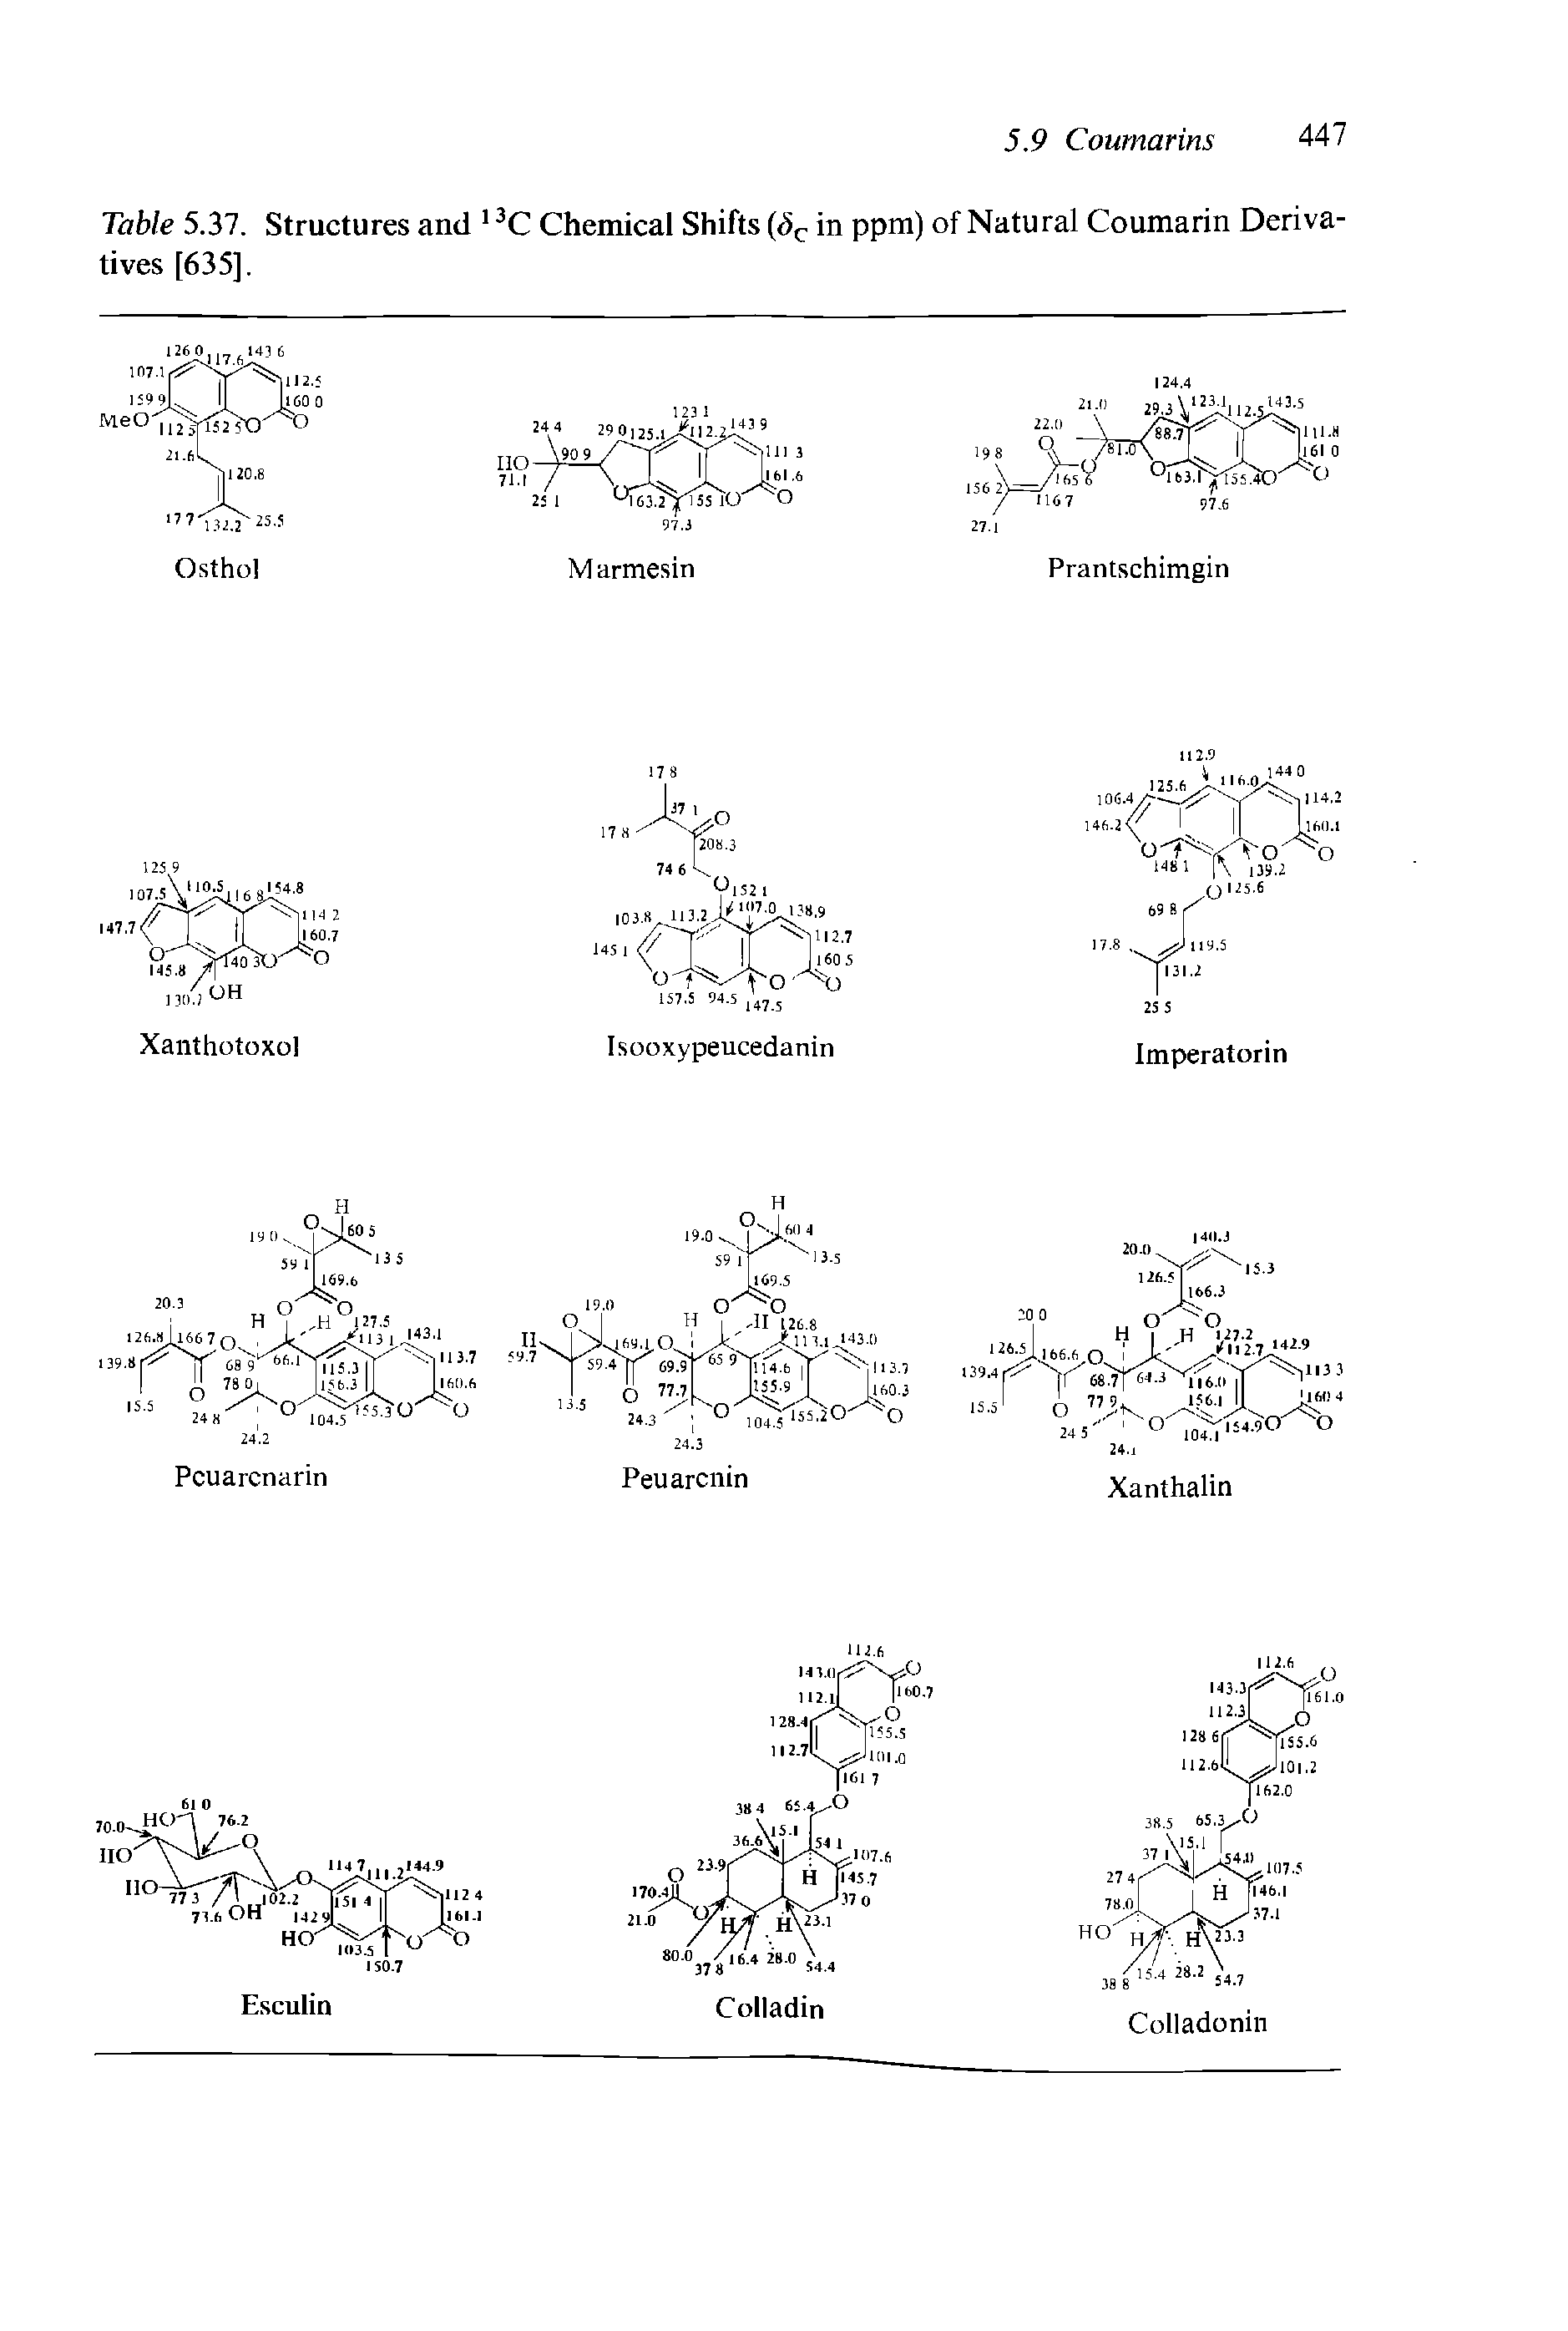 Table 5.37. Structures and 13C Chemical Shifts (<5C in ppm) of Natural Coumarin Derivatives [635],...